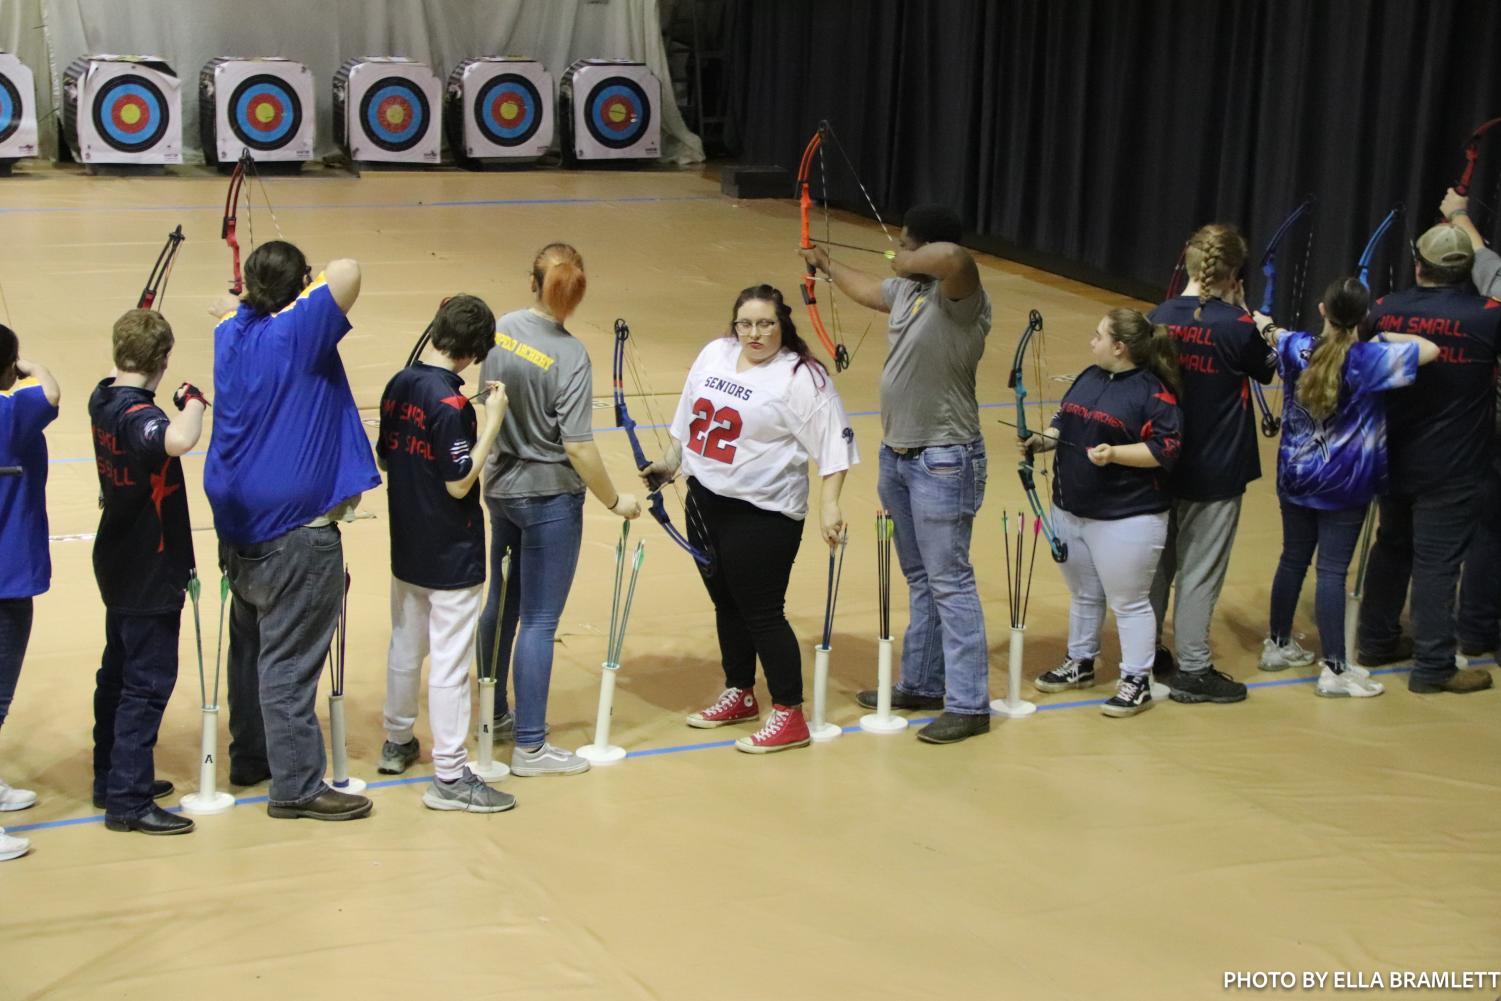 Archery+Places+2nd+Thursday+At+North+Half